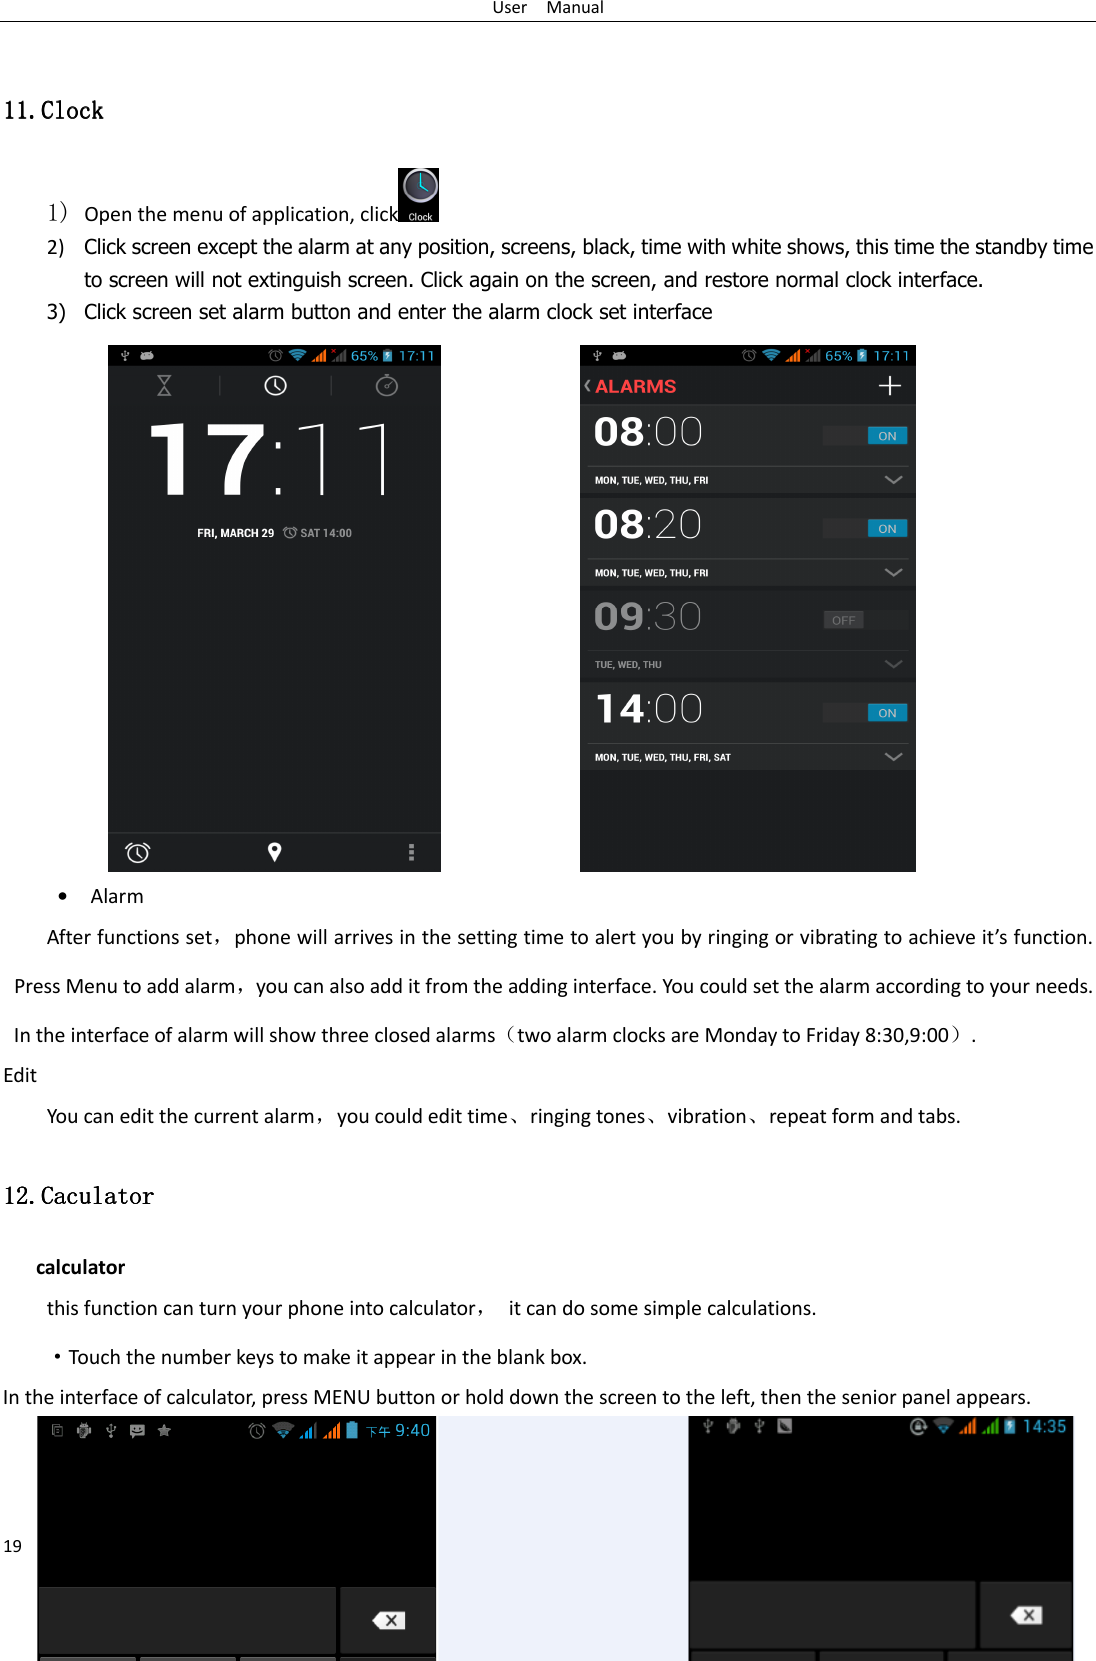 User    Manual 19  11.11.11.11.ClockClockClockClock    1) Open the menu of application, click 2) Click screen except the alarm at any position, screens, black, time with white shows, this time the standby time to screen will not extinguish screen. Click again on the screen, and restore normal clock interface. 3) Click screen set alarm button and enter the alarm clock set interface                  • Alarm After functions set，phone will arrives in the setting time to alert you by ringing or vibrating to achieve it’s function. Press Menu to add alarm，you can also add it from the adding interface. You could set the alarm according to your needs. In the interface of alarm will show three closed alarms（two alarm clocks are Monday to Friday 8:30,9:00）. Edit You can edit the current alarm，you could edit time、ringing tones、vibration、repeat form and tabs. 12.12.12.12.CaculatorCaculatorCaculatorCaculator    calculator this function can turn your phone into calculator，  it can do some simple calculations. ·Touch the number keys to make it appear in the blank box. In the interface of calculator, press MENU button or hold down the screen to the left, then the senior panel appears.    